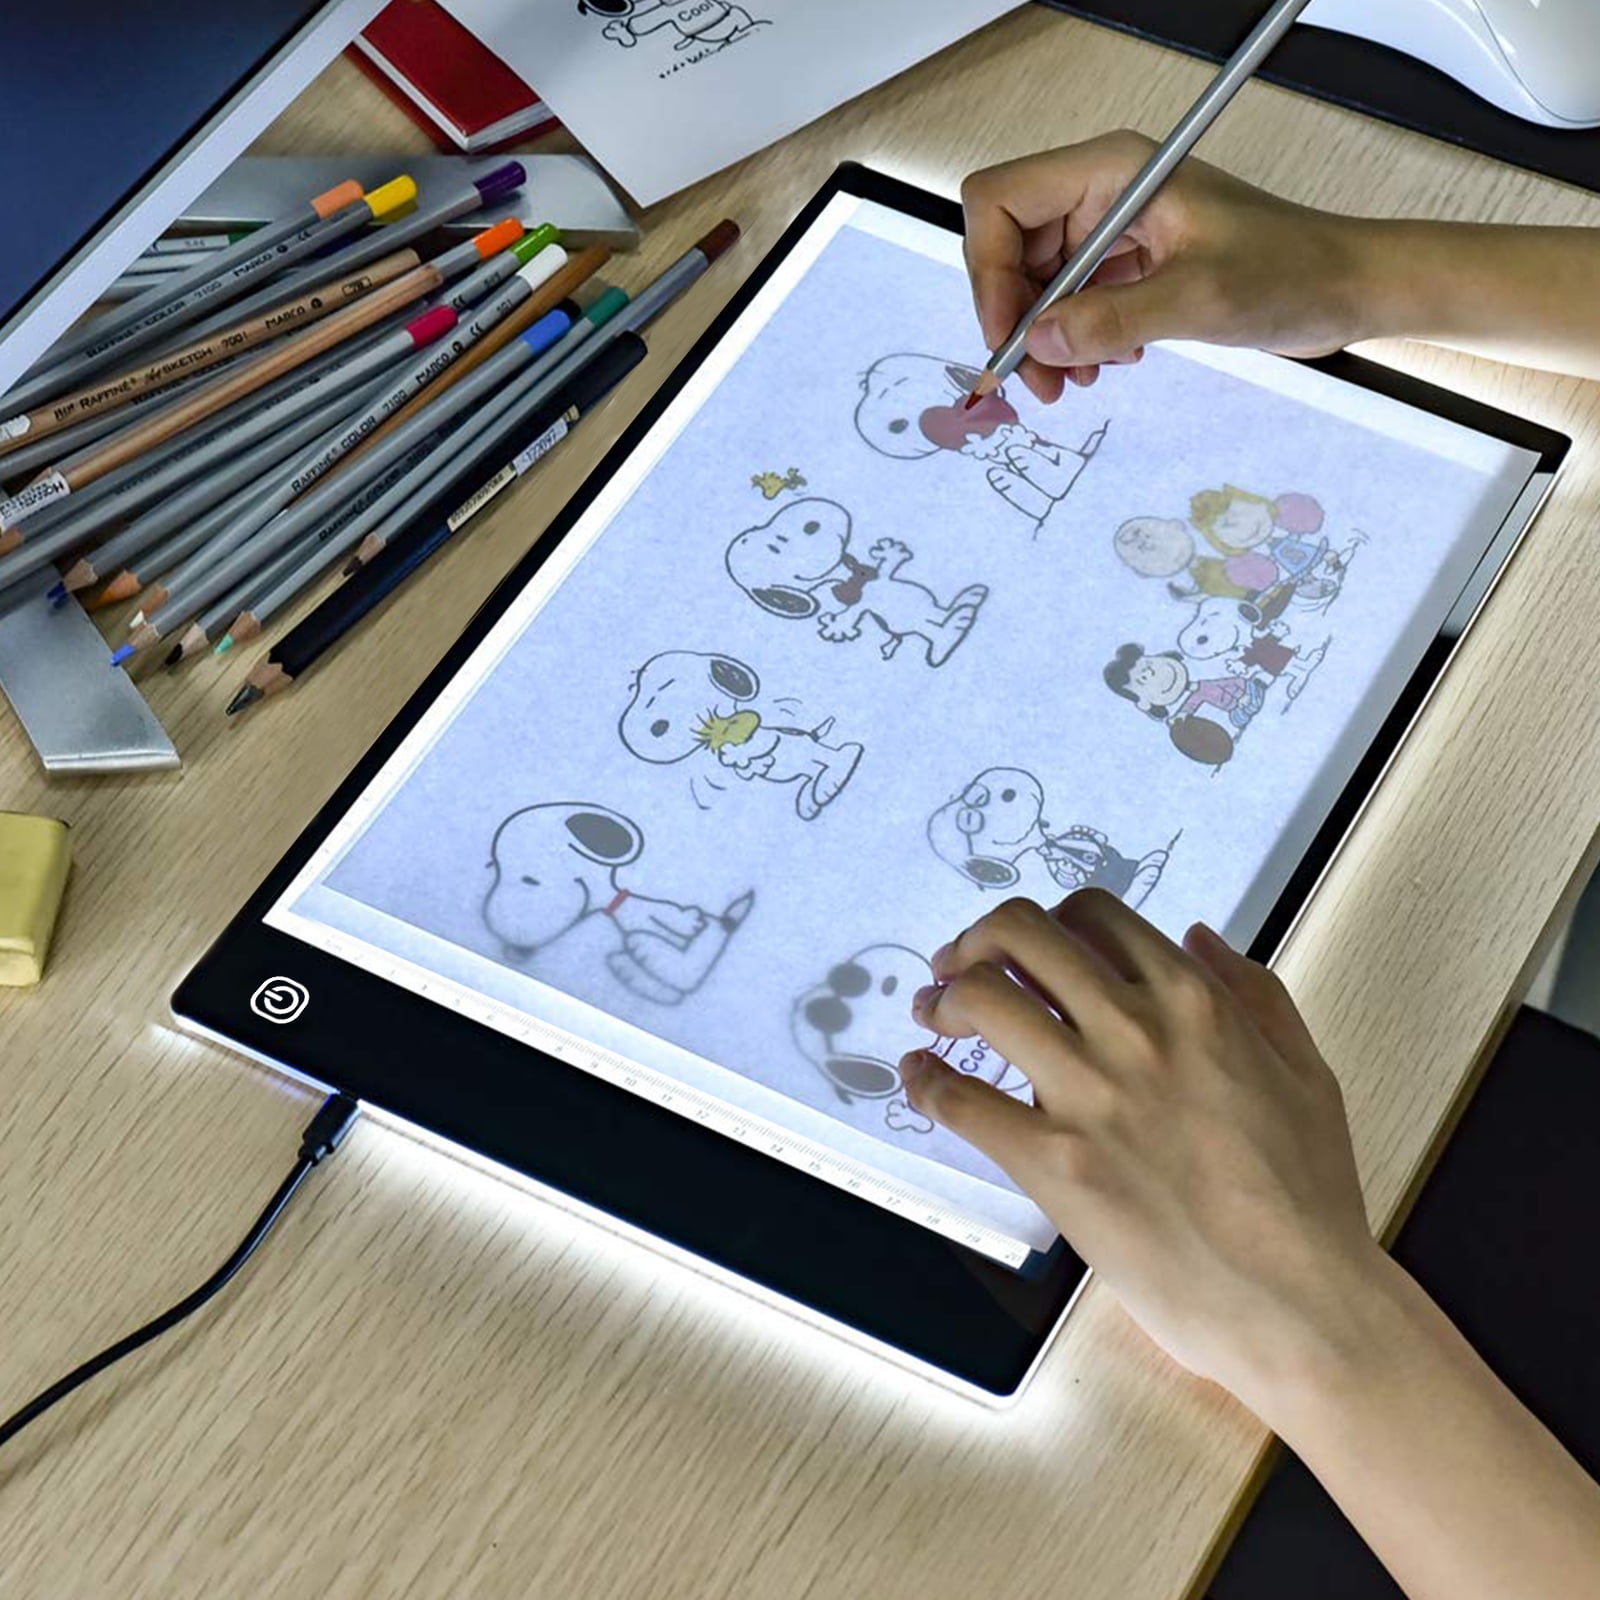 Portable A4 LED Light Box for Artcraft Tracing SUPERDANNY Ultra-Thin Dimmable Brightness Copy Board with Clips USB Powered Light Pad for Artists Drawing Sketching Animation Steaming Painting 